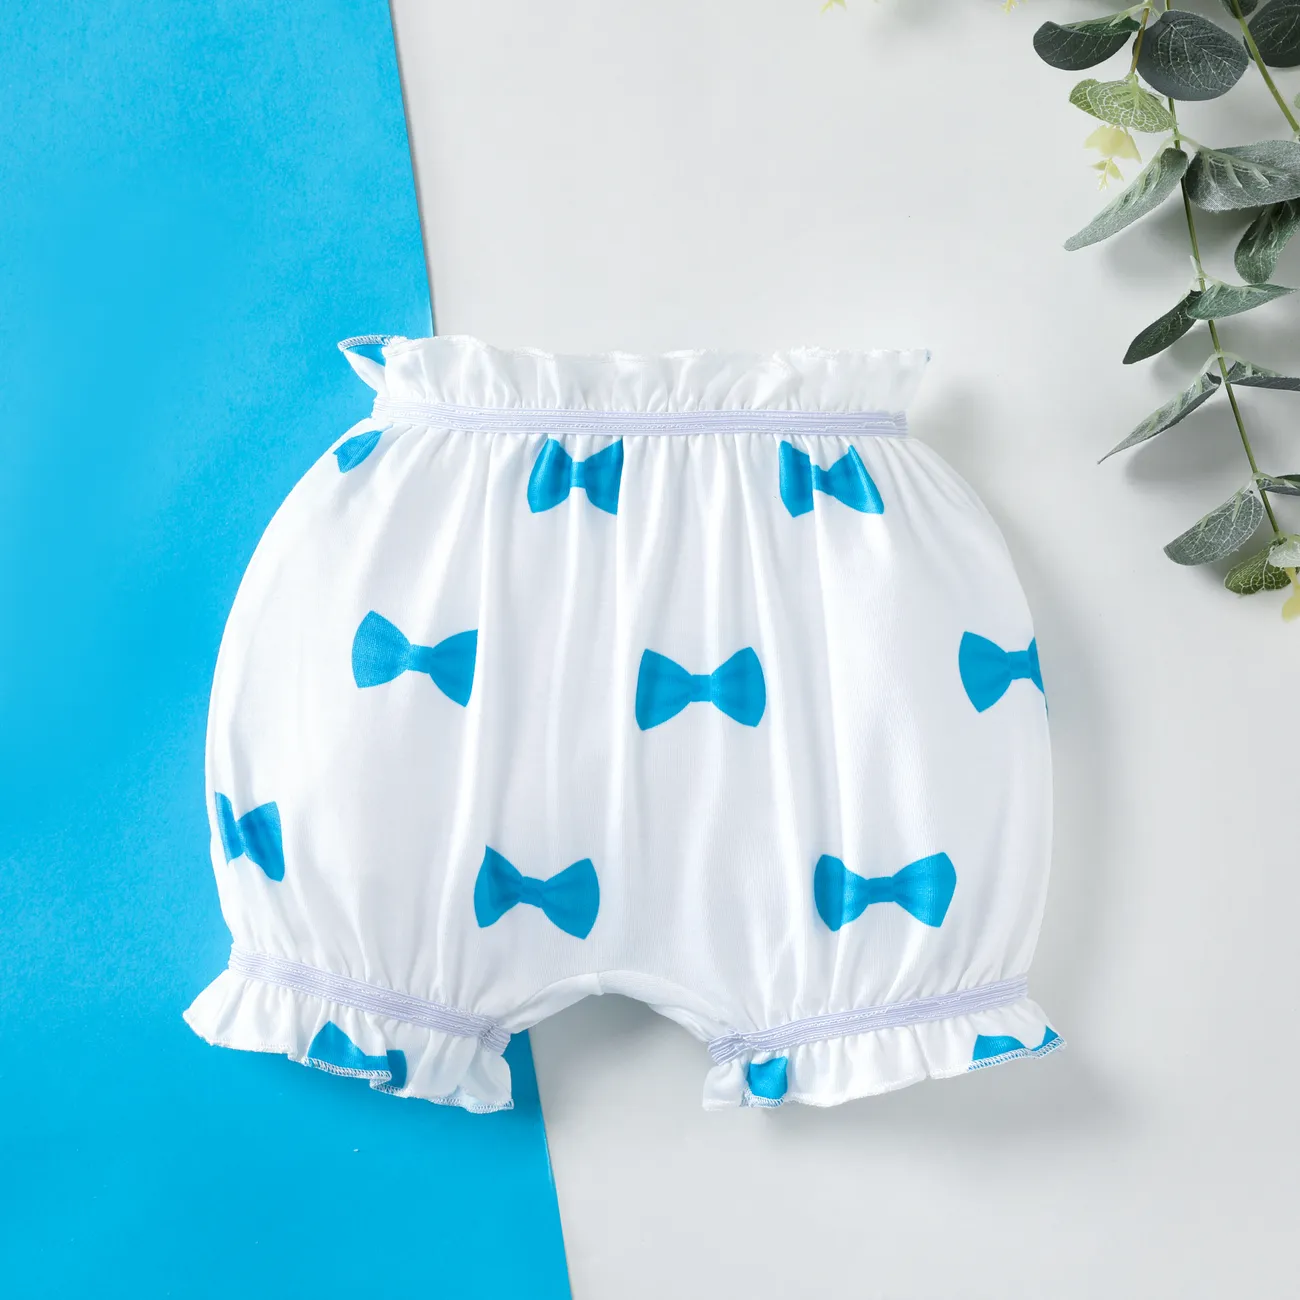  Toddler Boy Cute Striped Underwear with Lace Trim  White big image 1